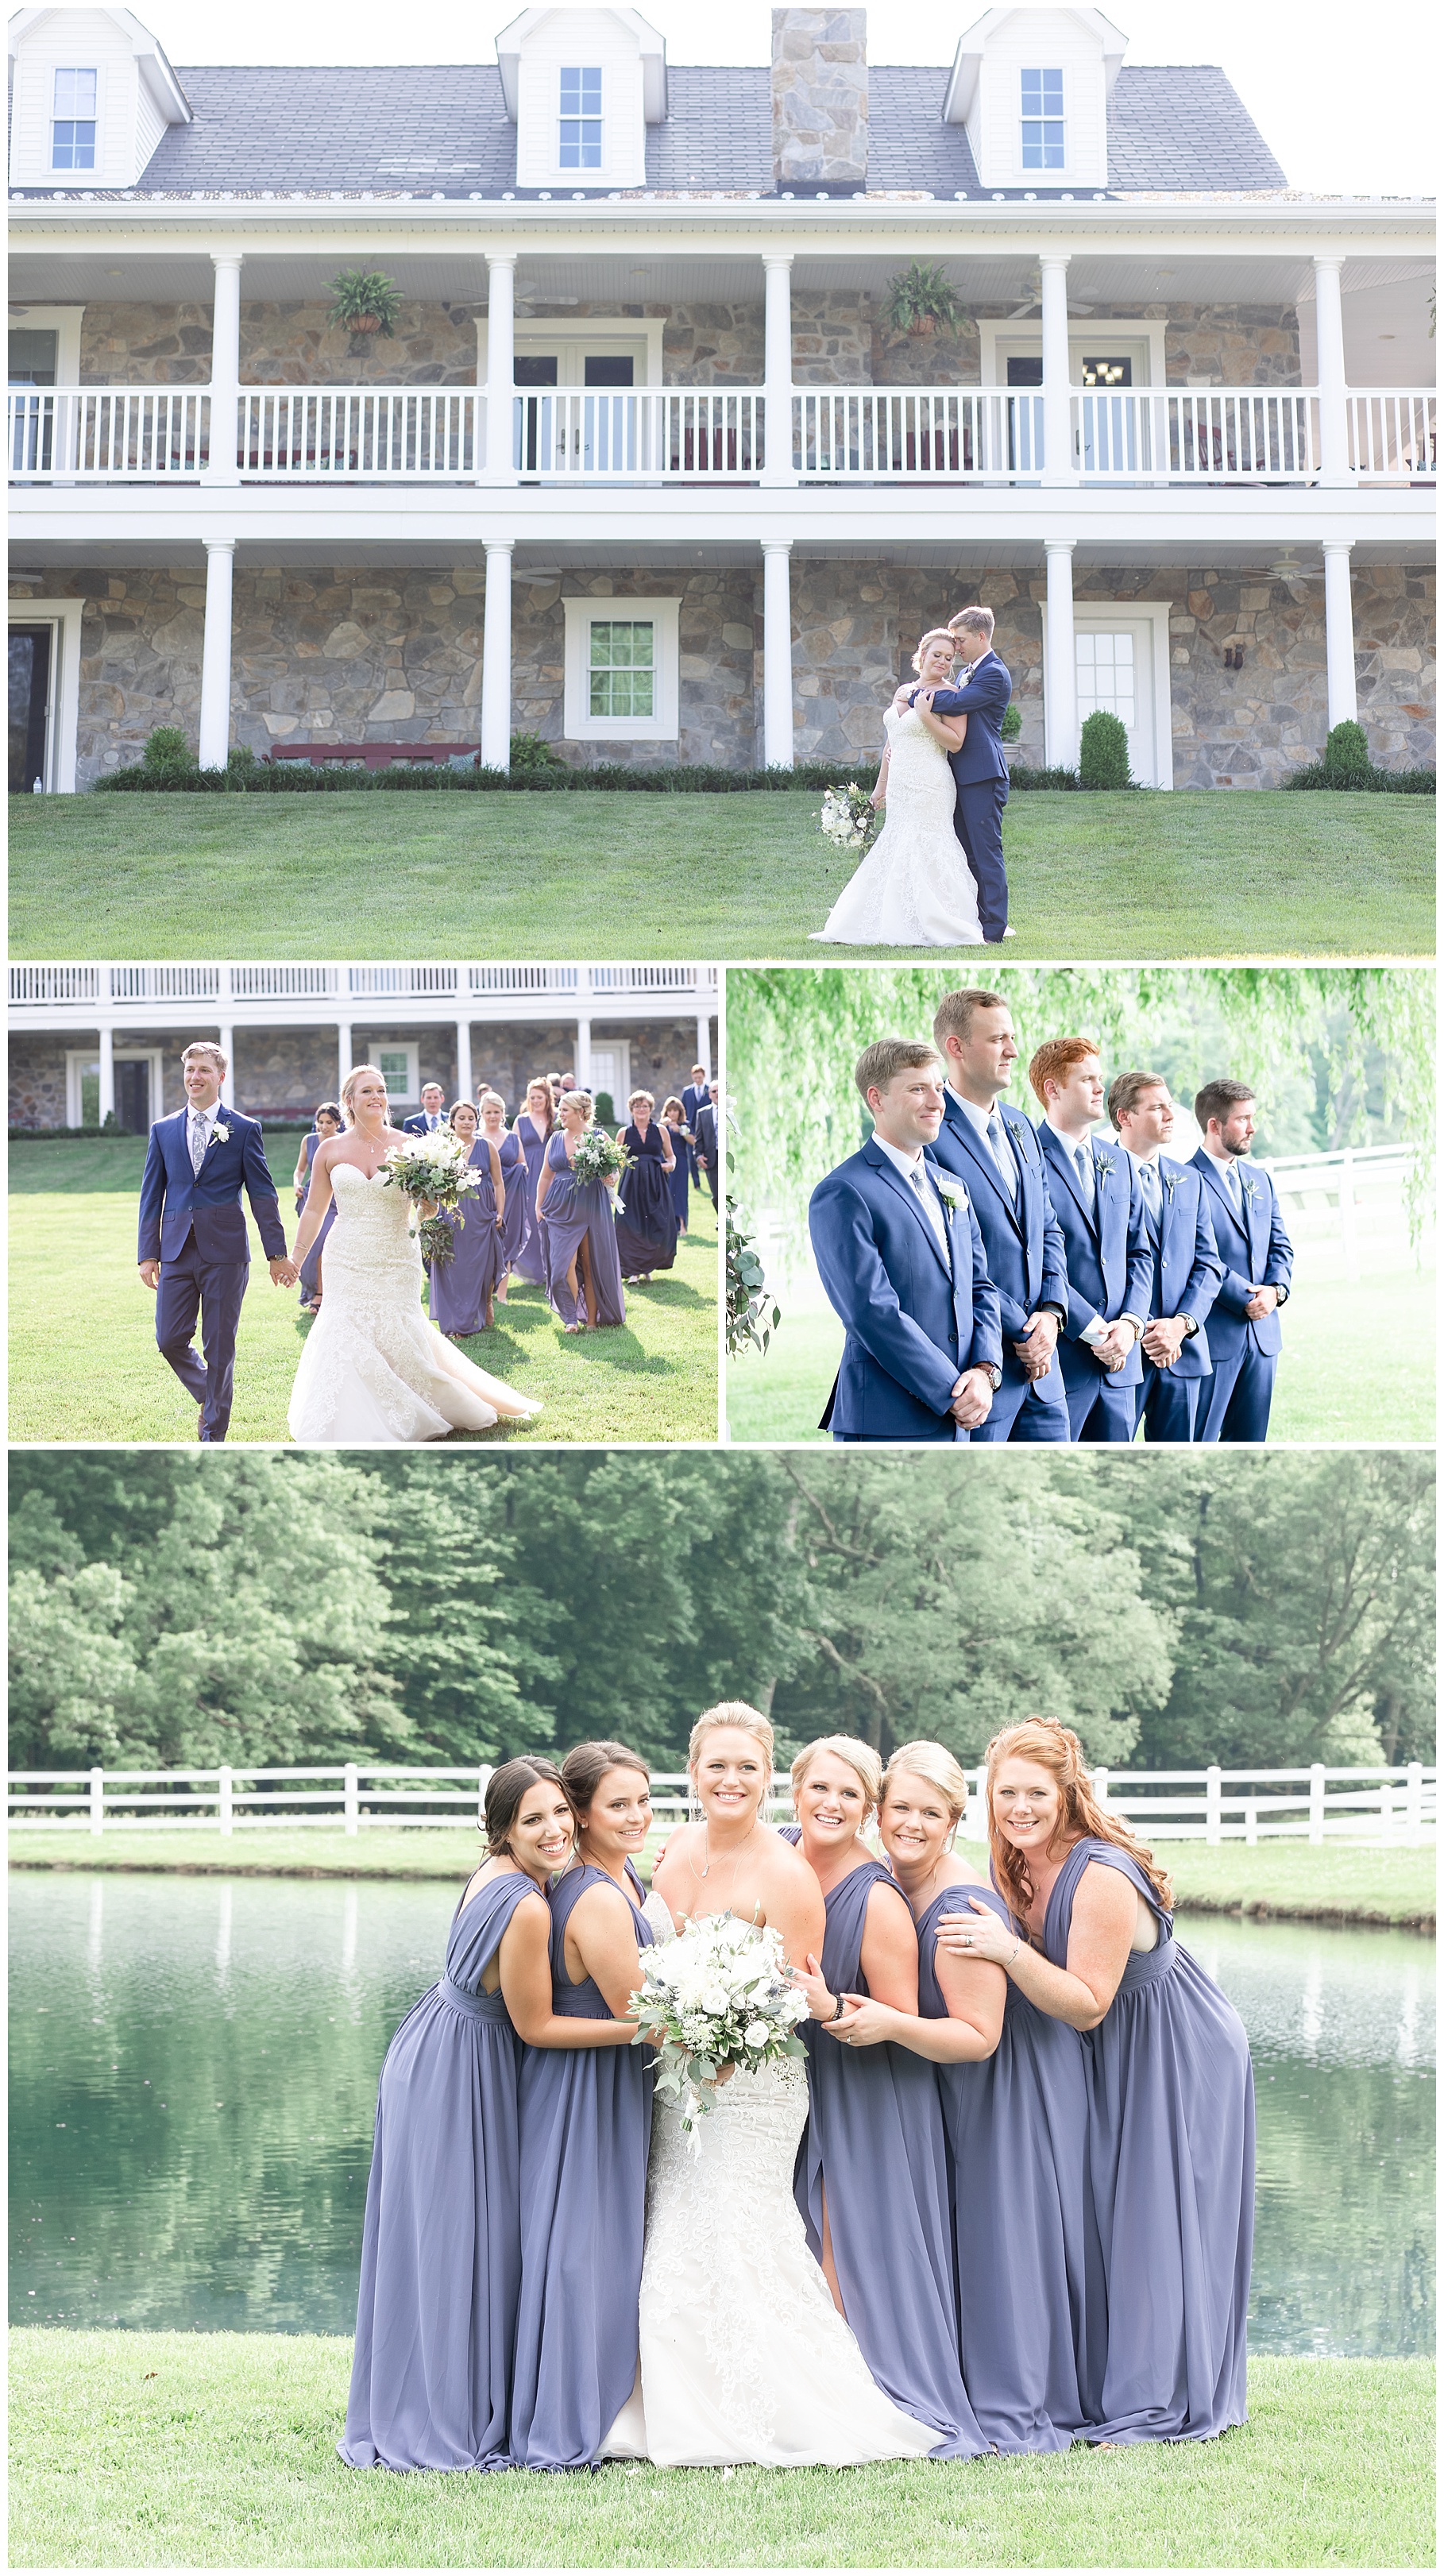 A grid of images from the Summer wedding at Pondview Farms